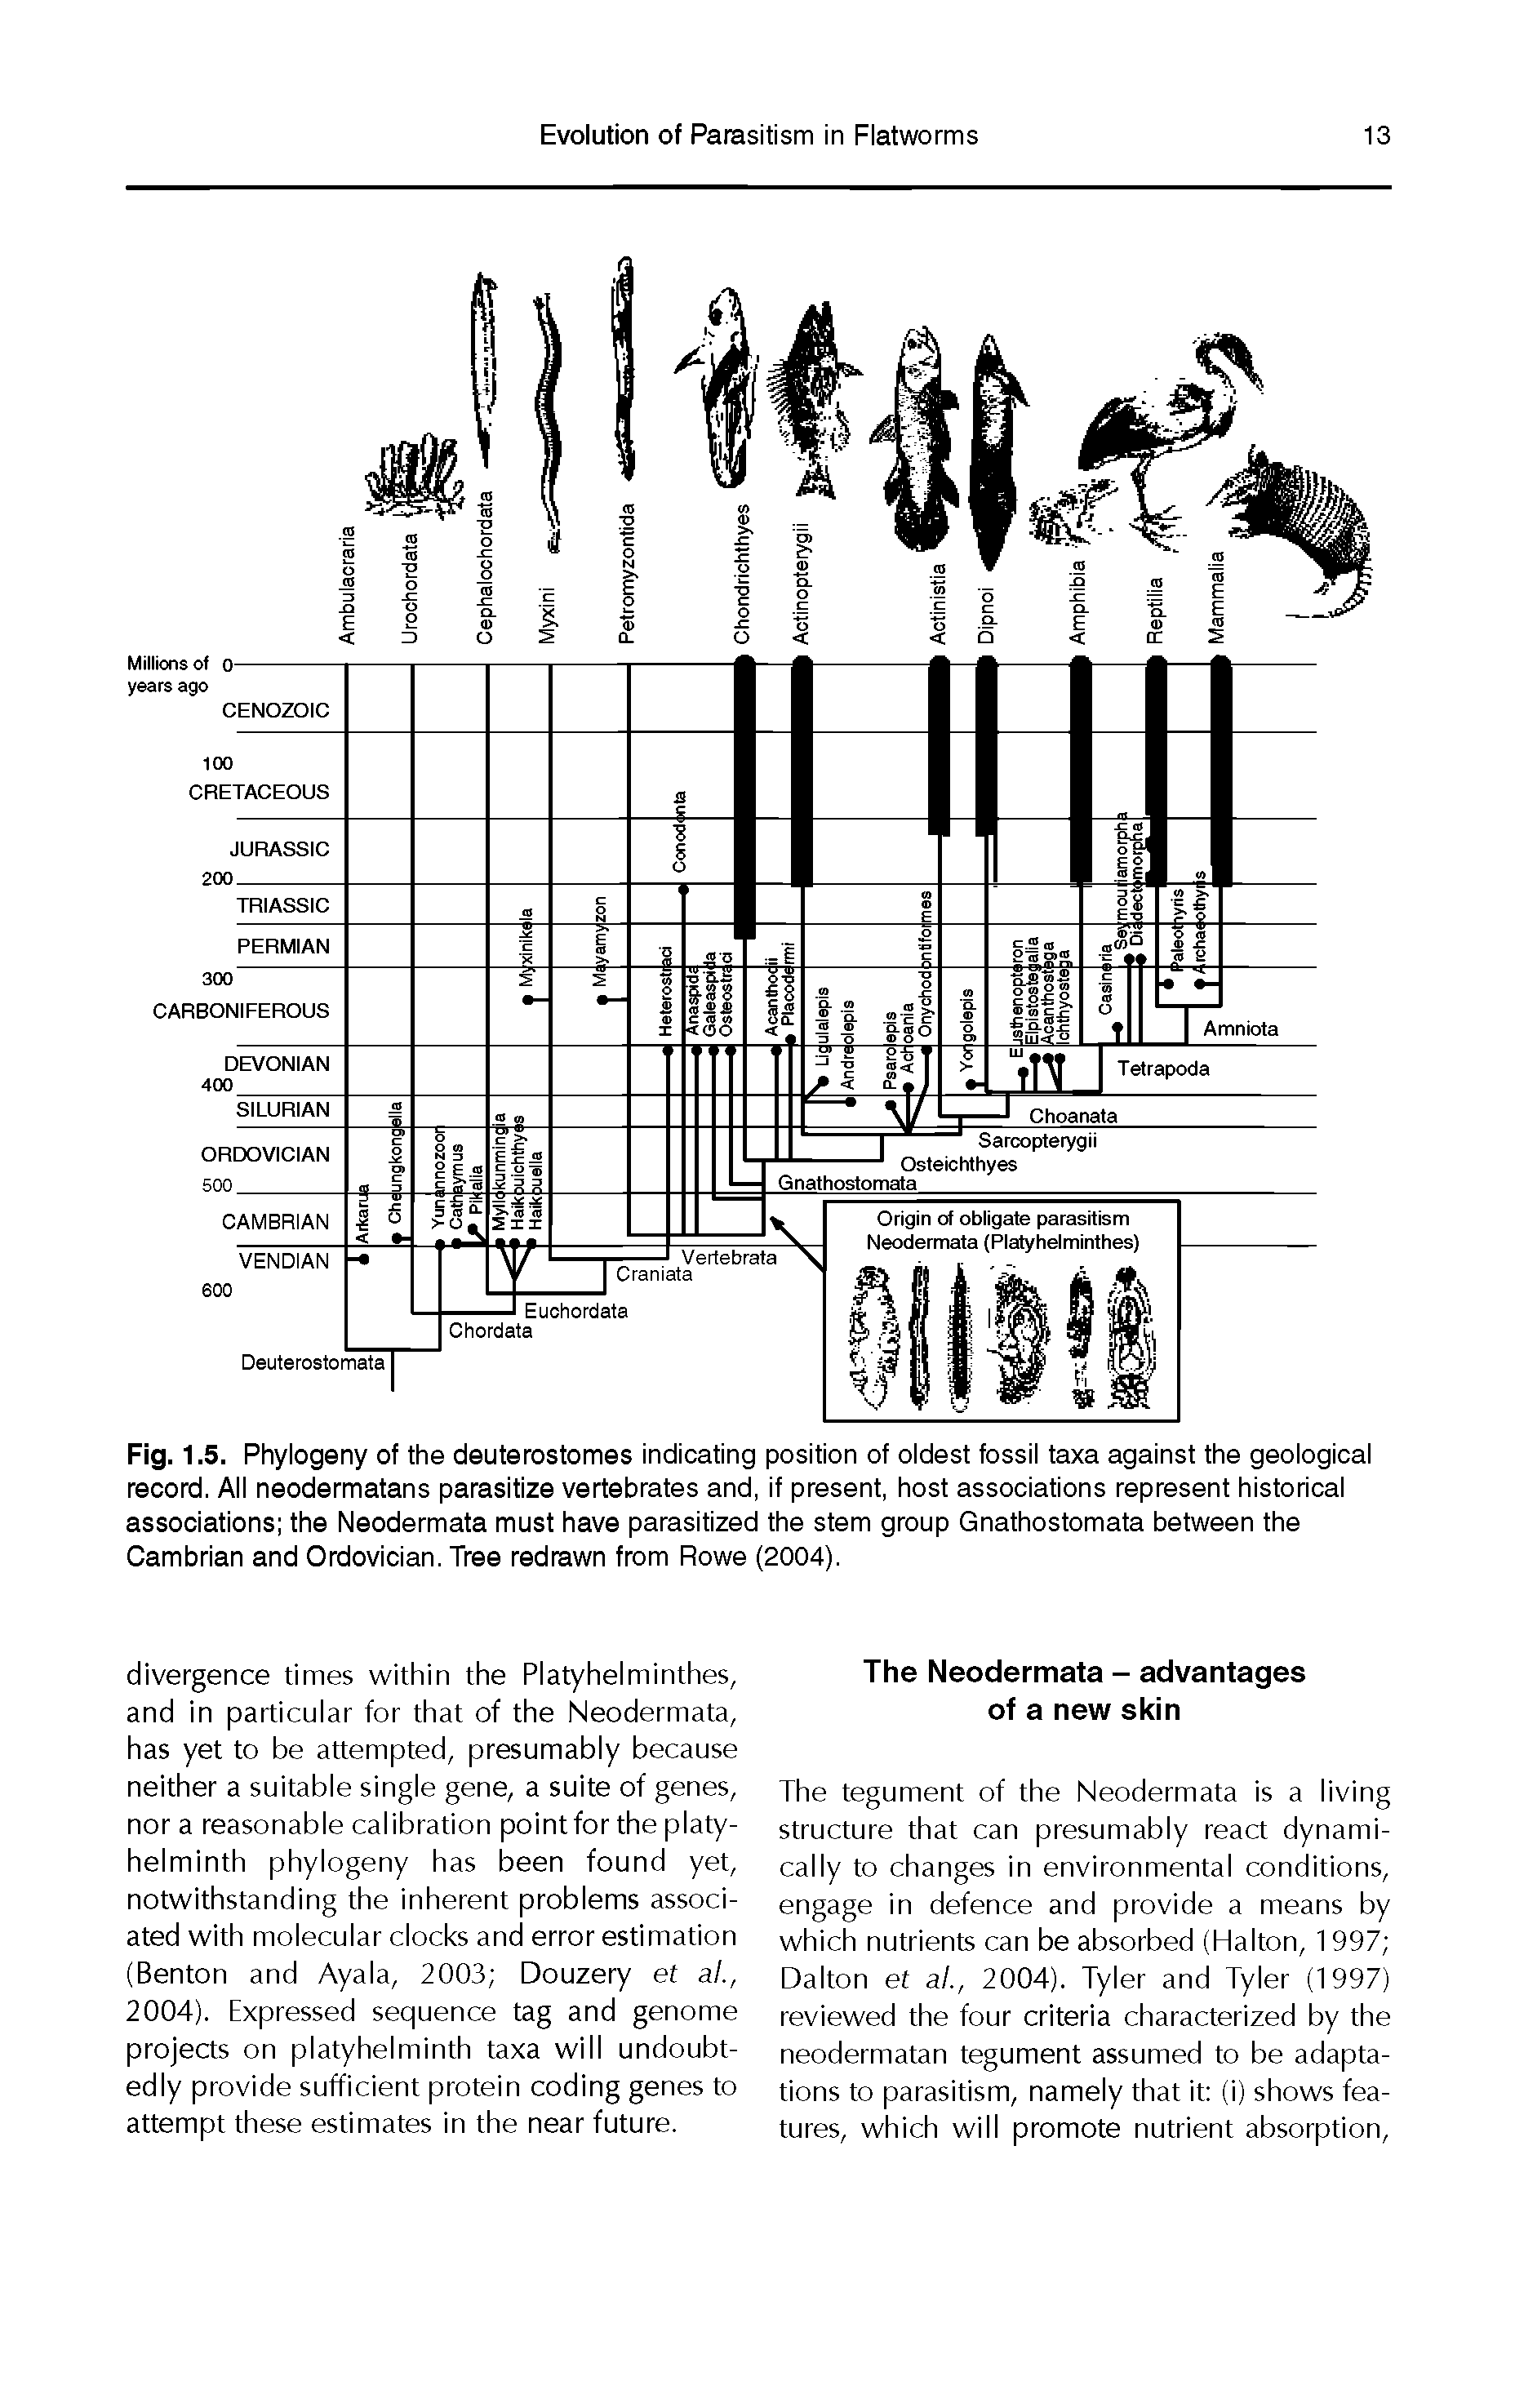 Fig. 1.5. Phylogeny of the deuterostomes indicating position of oldest fossil taxa against the geological record. All neodermatans parasitize vertebrates and, if present, host associations represent historical associations the Neodermata must have parasitized the stem group Gnathostomata between the Cambrian and Ordovician. Tree redrawn from Rowe (2004).